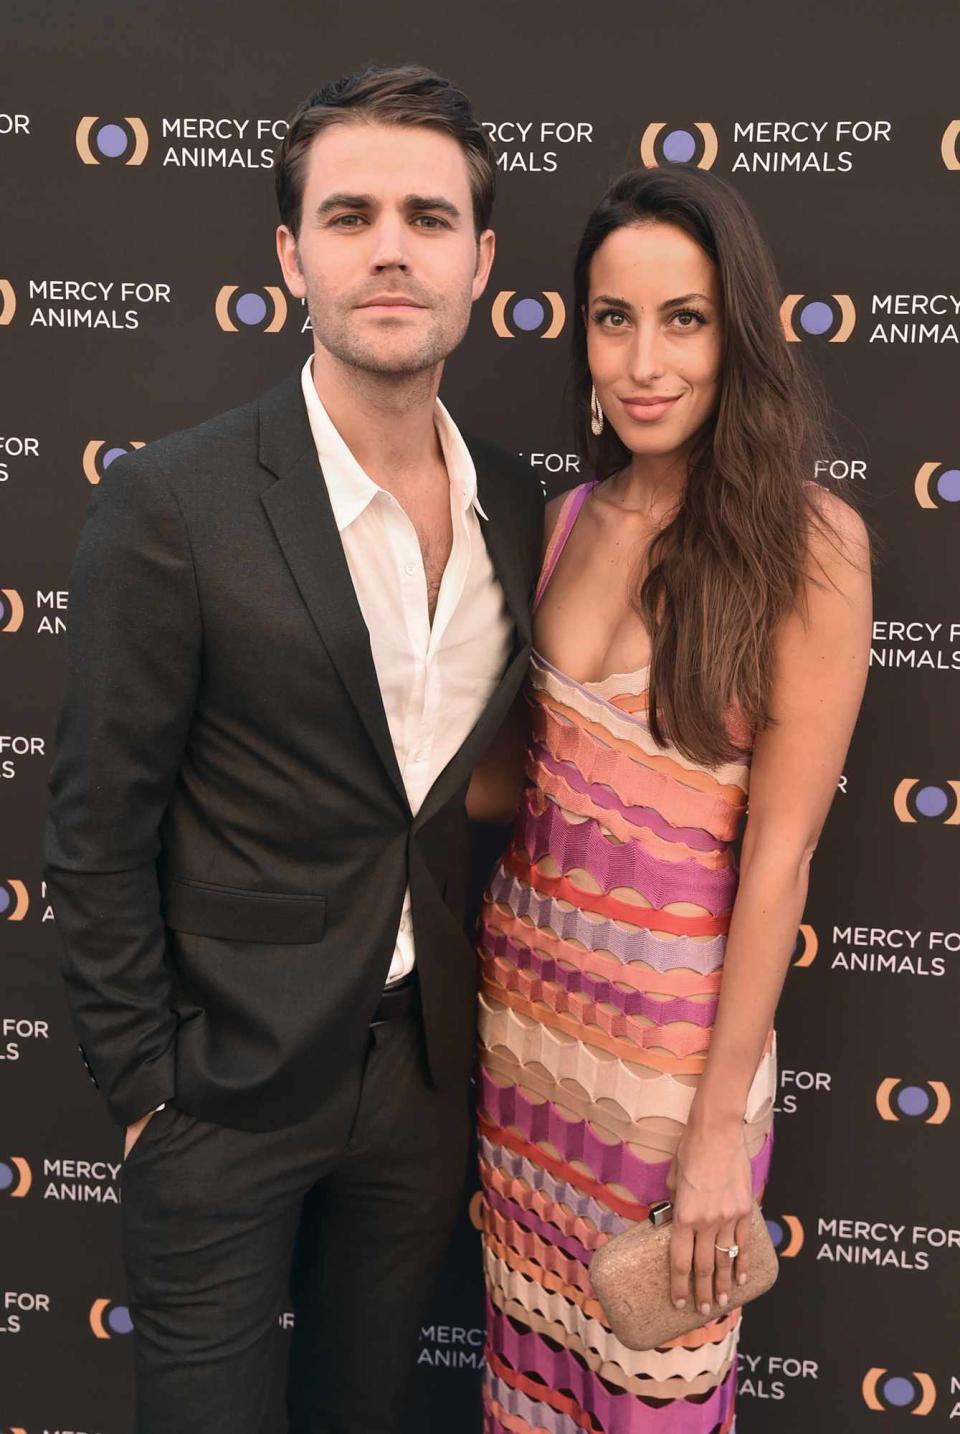 Paul Wesley And Ines De Ramon attend the Mercy For Animals 20th Anniversary Gala at The Shrine Auditorium on September 14, 2019 in Los Angeles, California